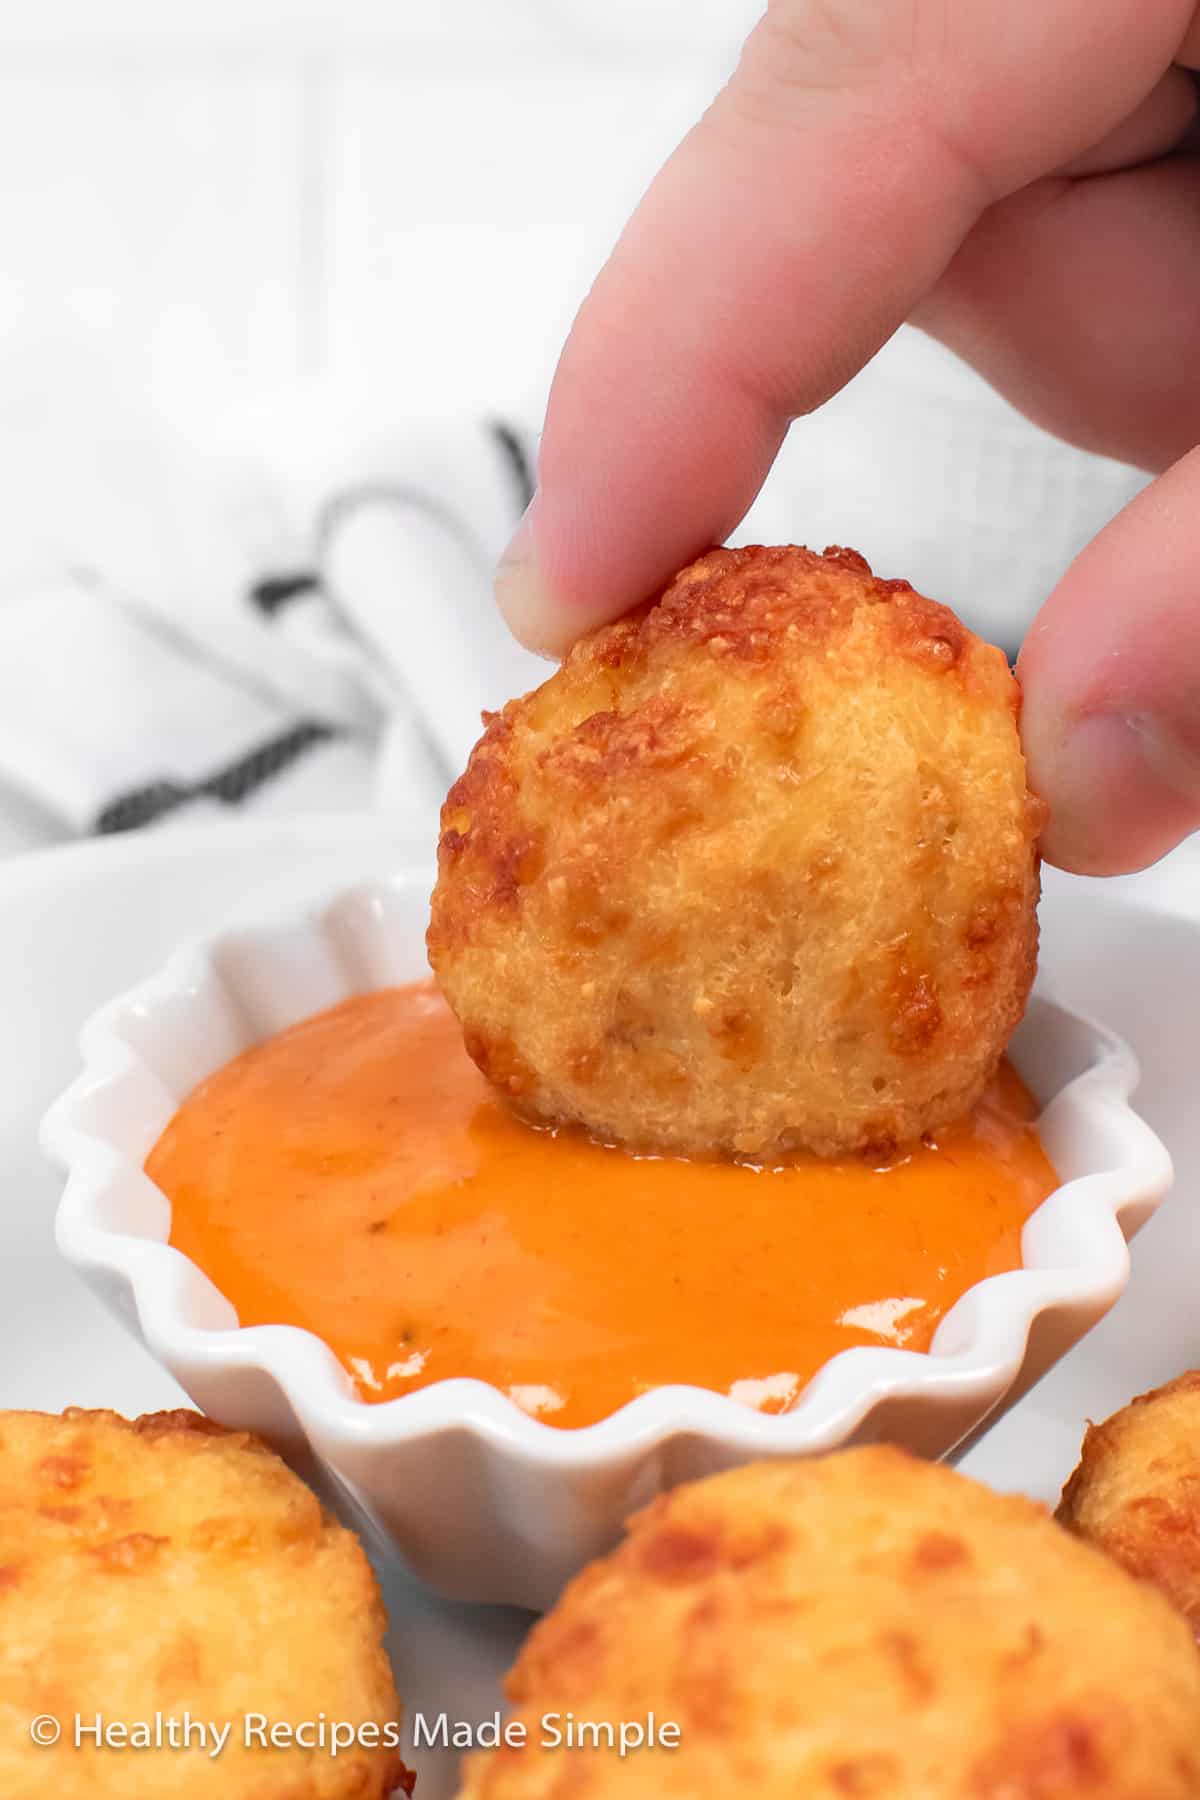 A crispy chicken nugget being dipped in sauce.